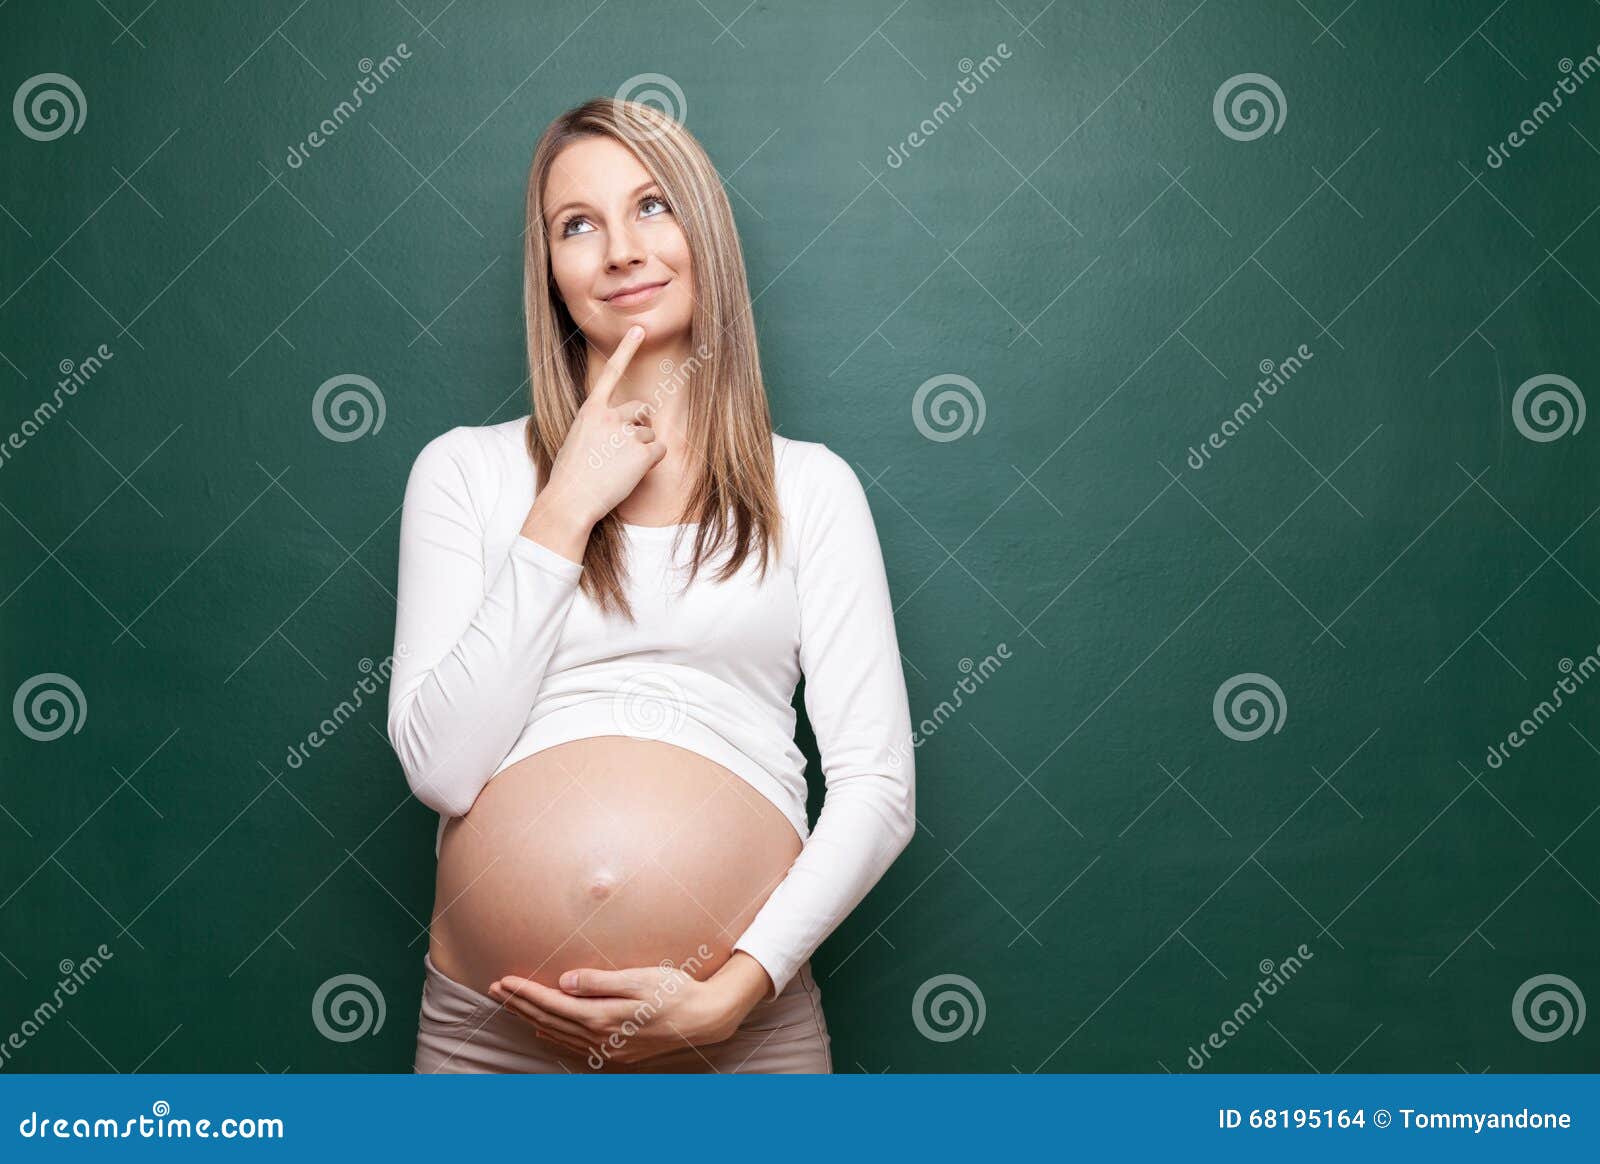 pregnant woman and a blackboard with copyspace